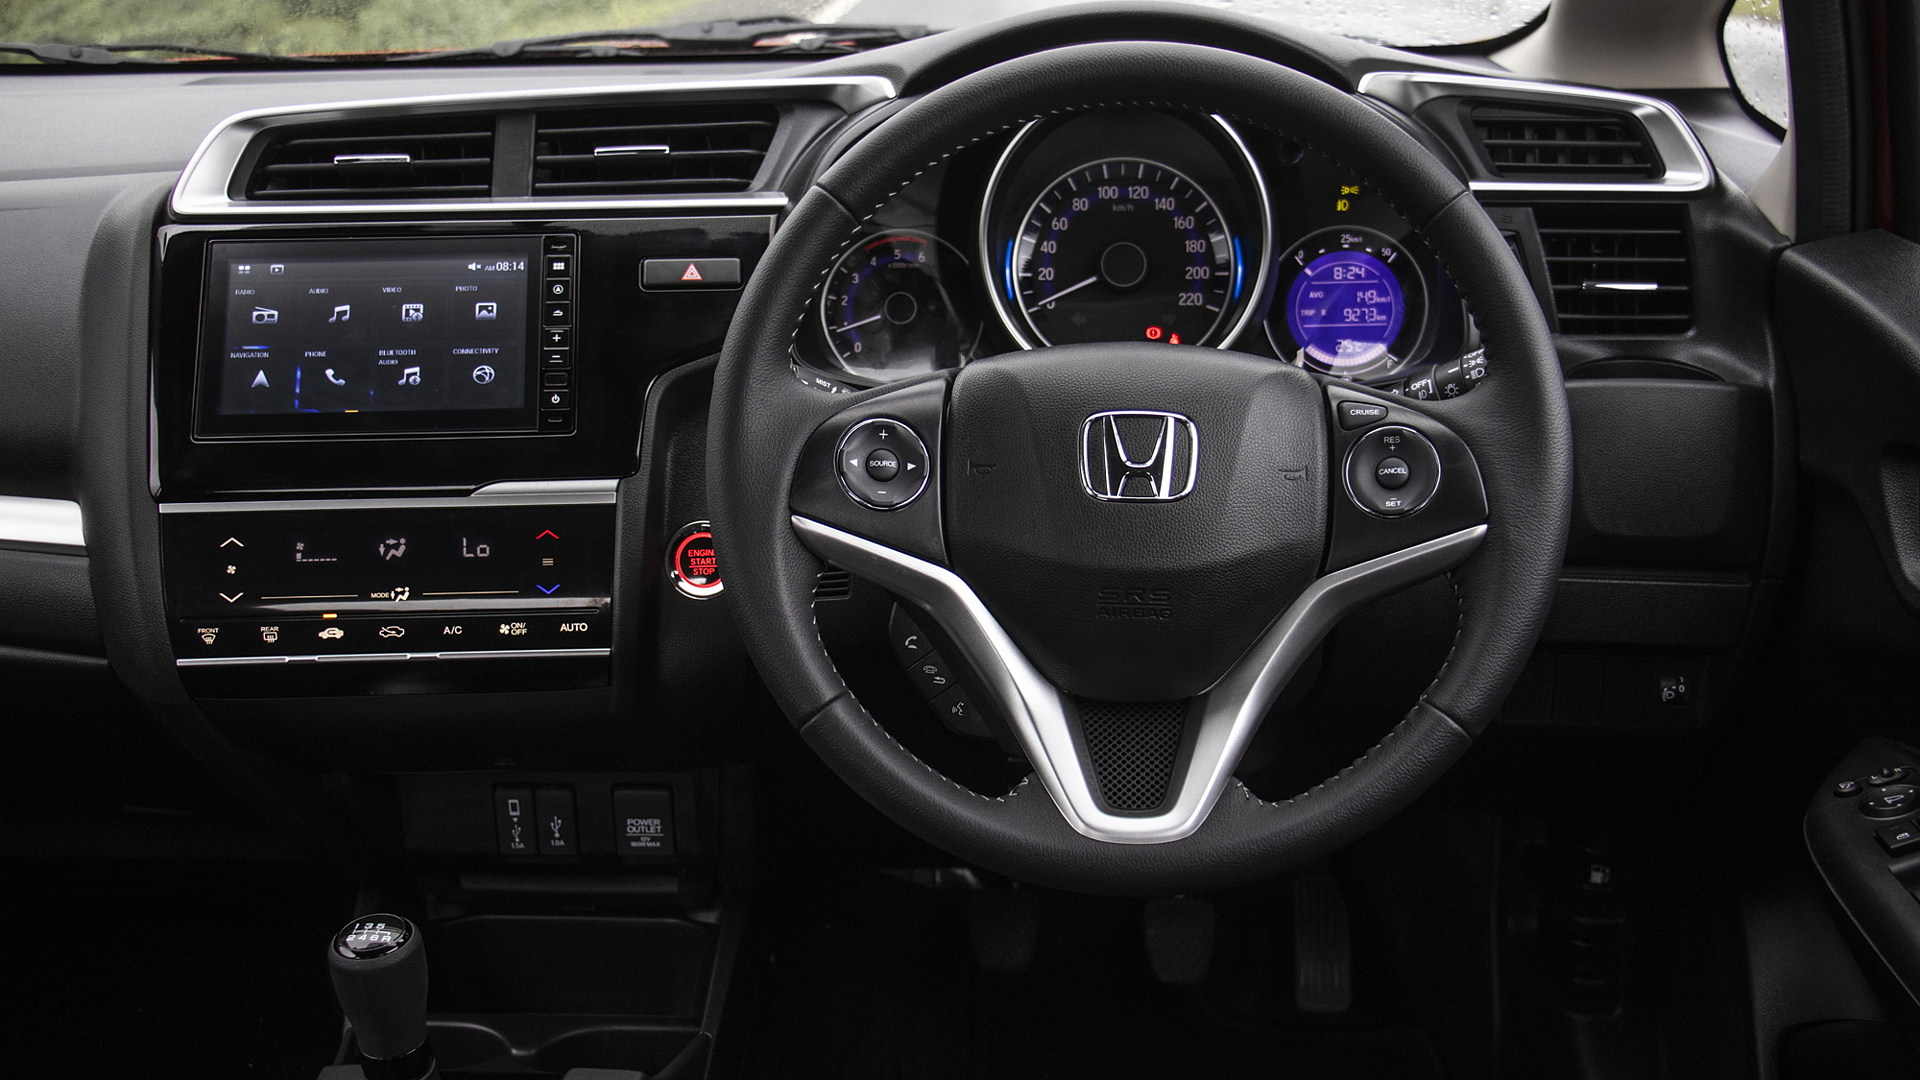 Honda Wr V Images Interior Exterior Photo Gallery 100 Images Carwale